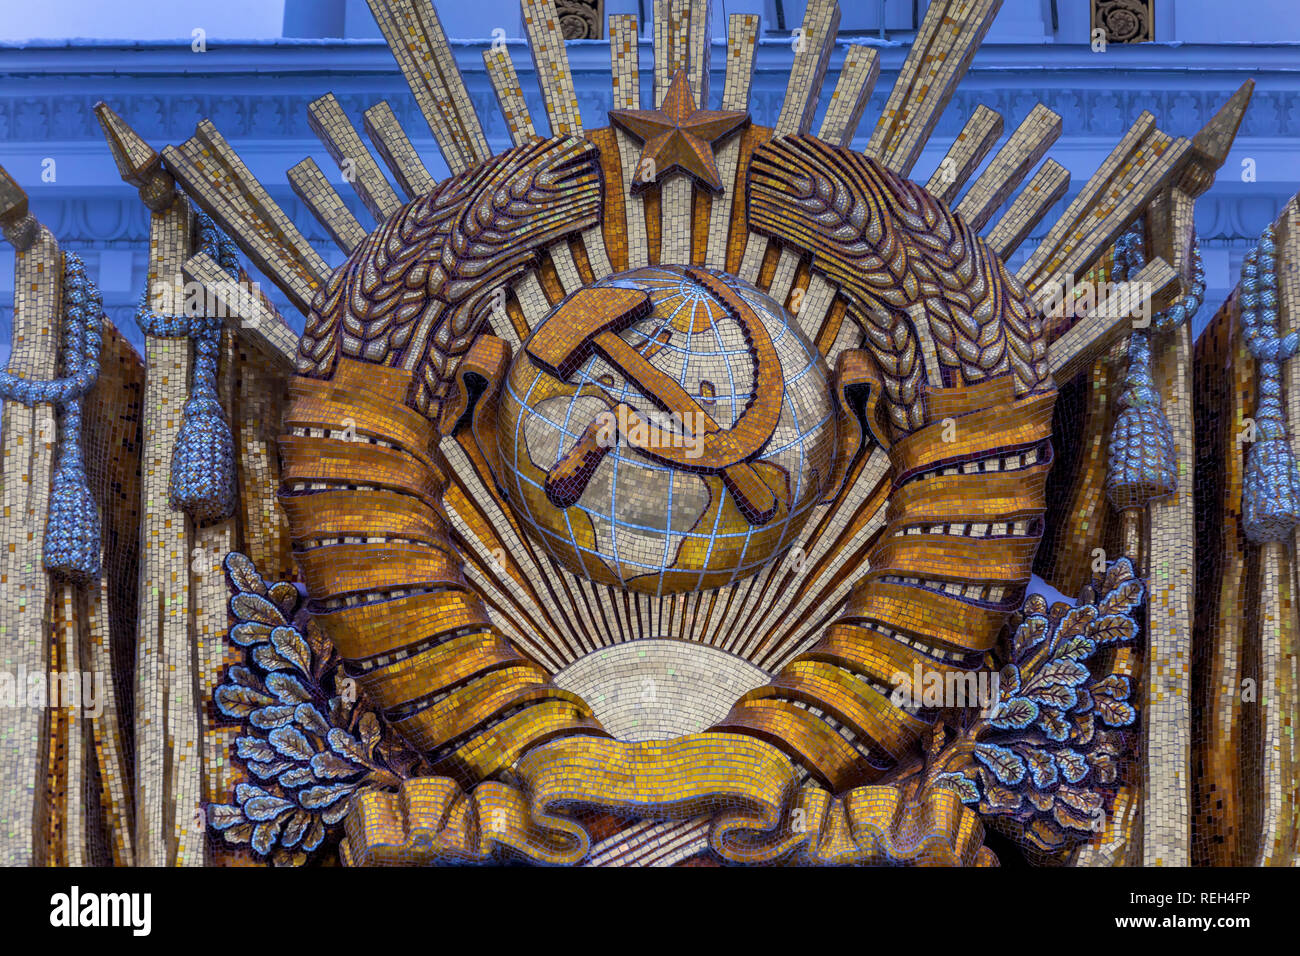 USSR coat of arms on the facade of pavilion No. 1 'Central' (main pavilion) at VDNH exhibition centre in Moscow, Russia Stock Photo